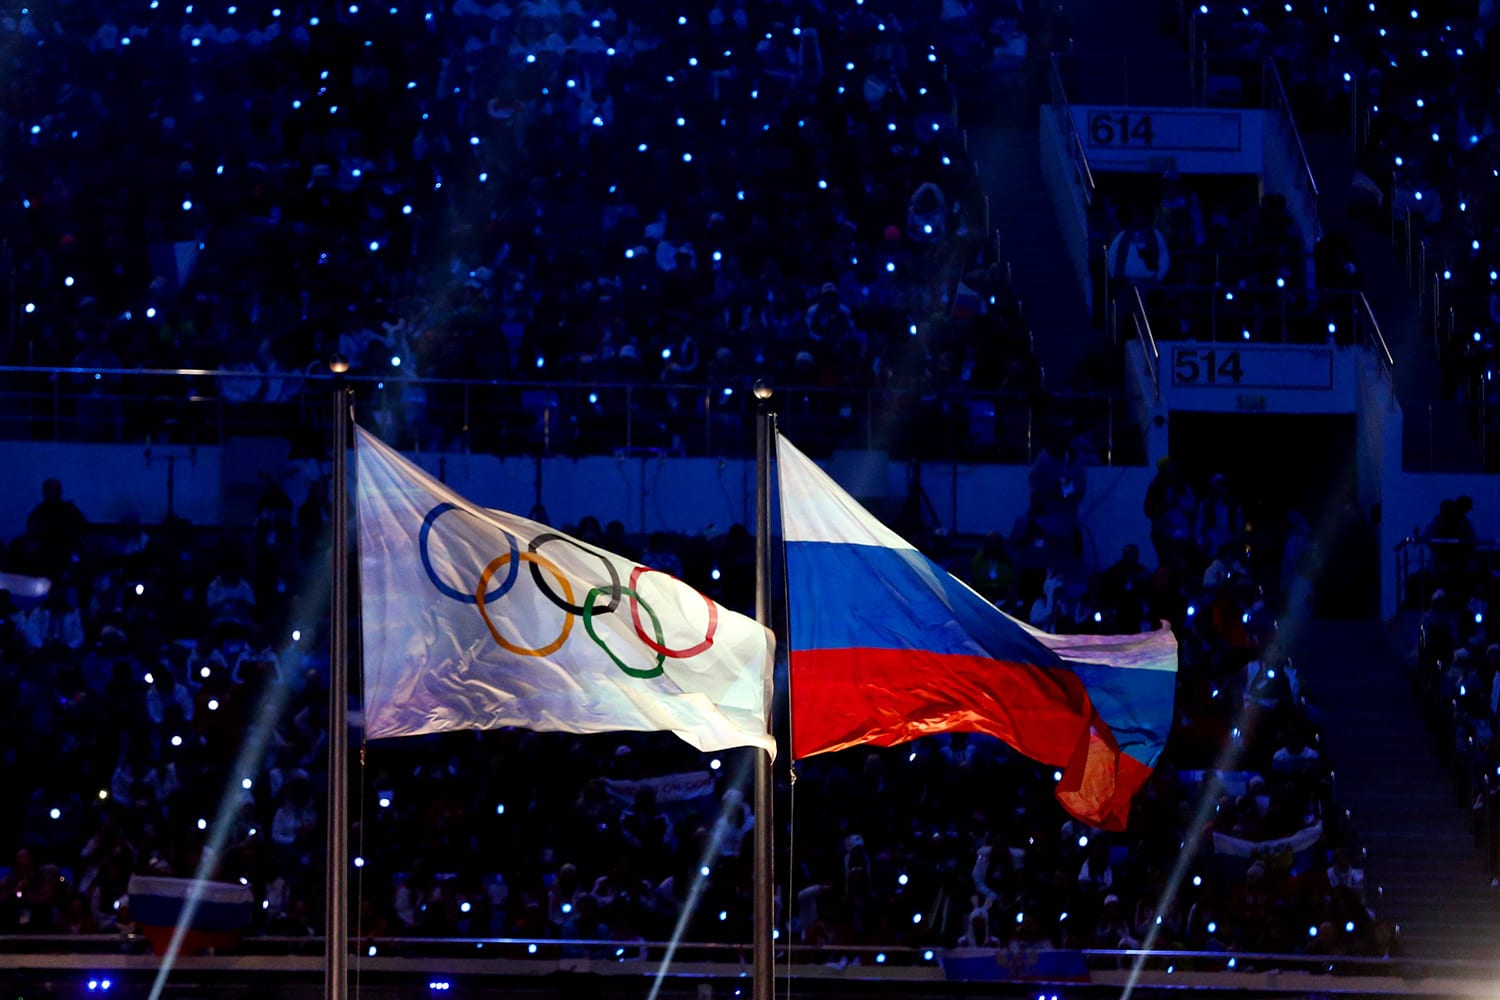 The flag of the IOC flies next to the flag of the Russian Federation at night during the closing ceremony for Sochi 2014.